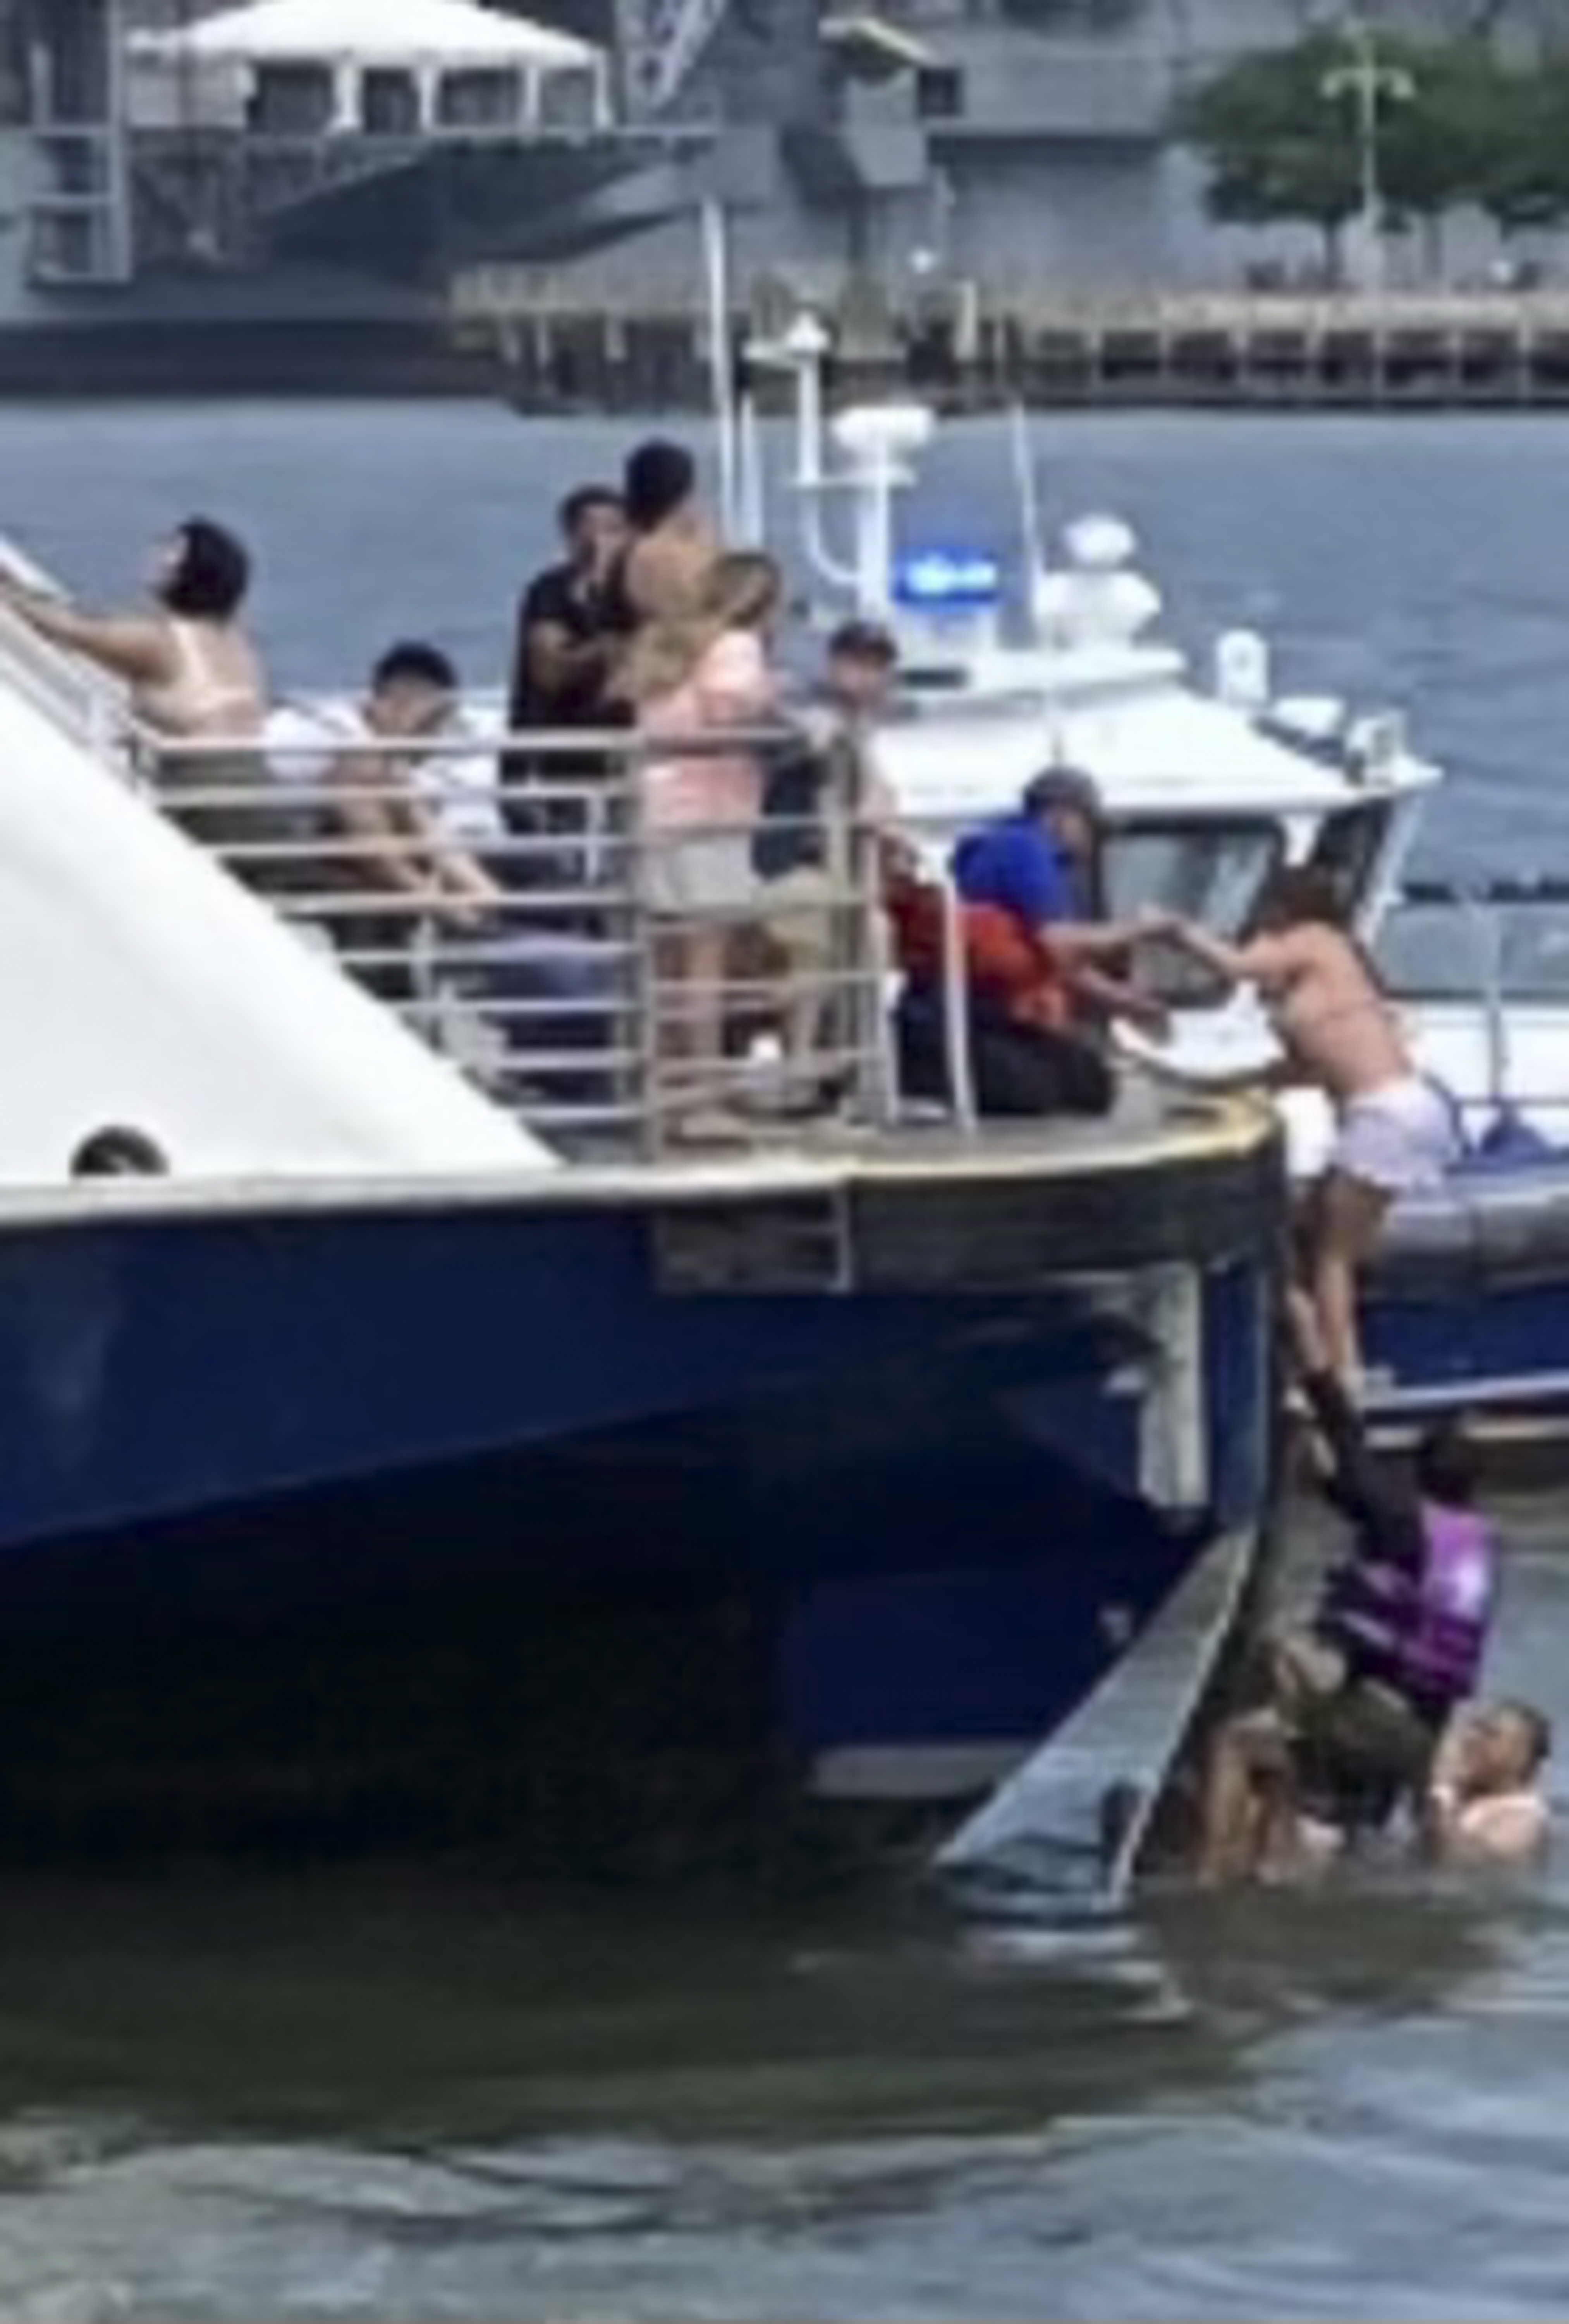 Twelve people were thrown into the Hudson